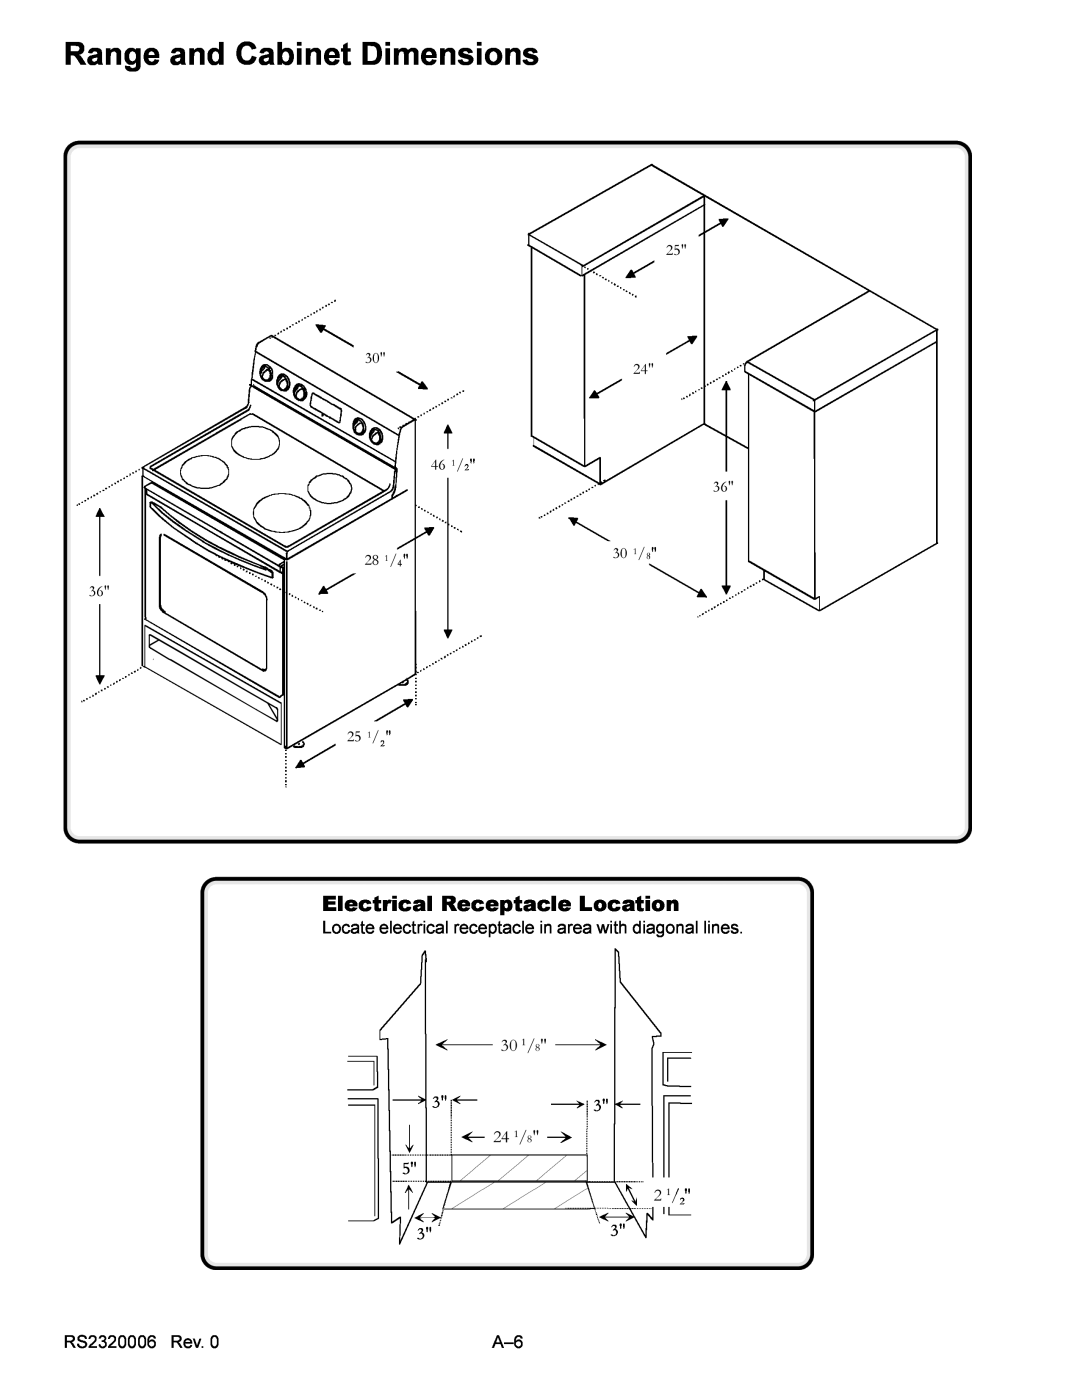 Amana RS2320006 service manual Range and Cabinet Dimensions, Electrical Receptacle Location 